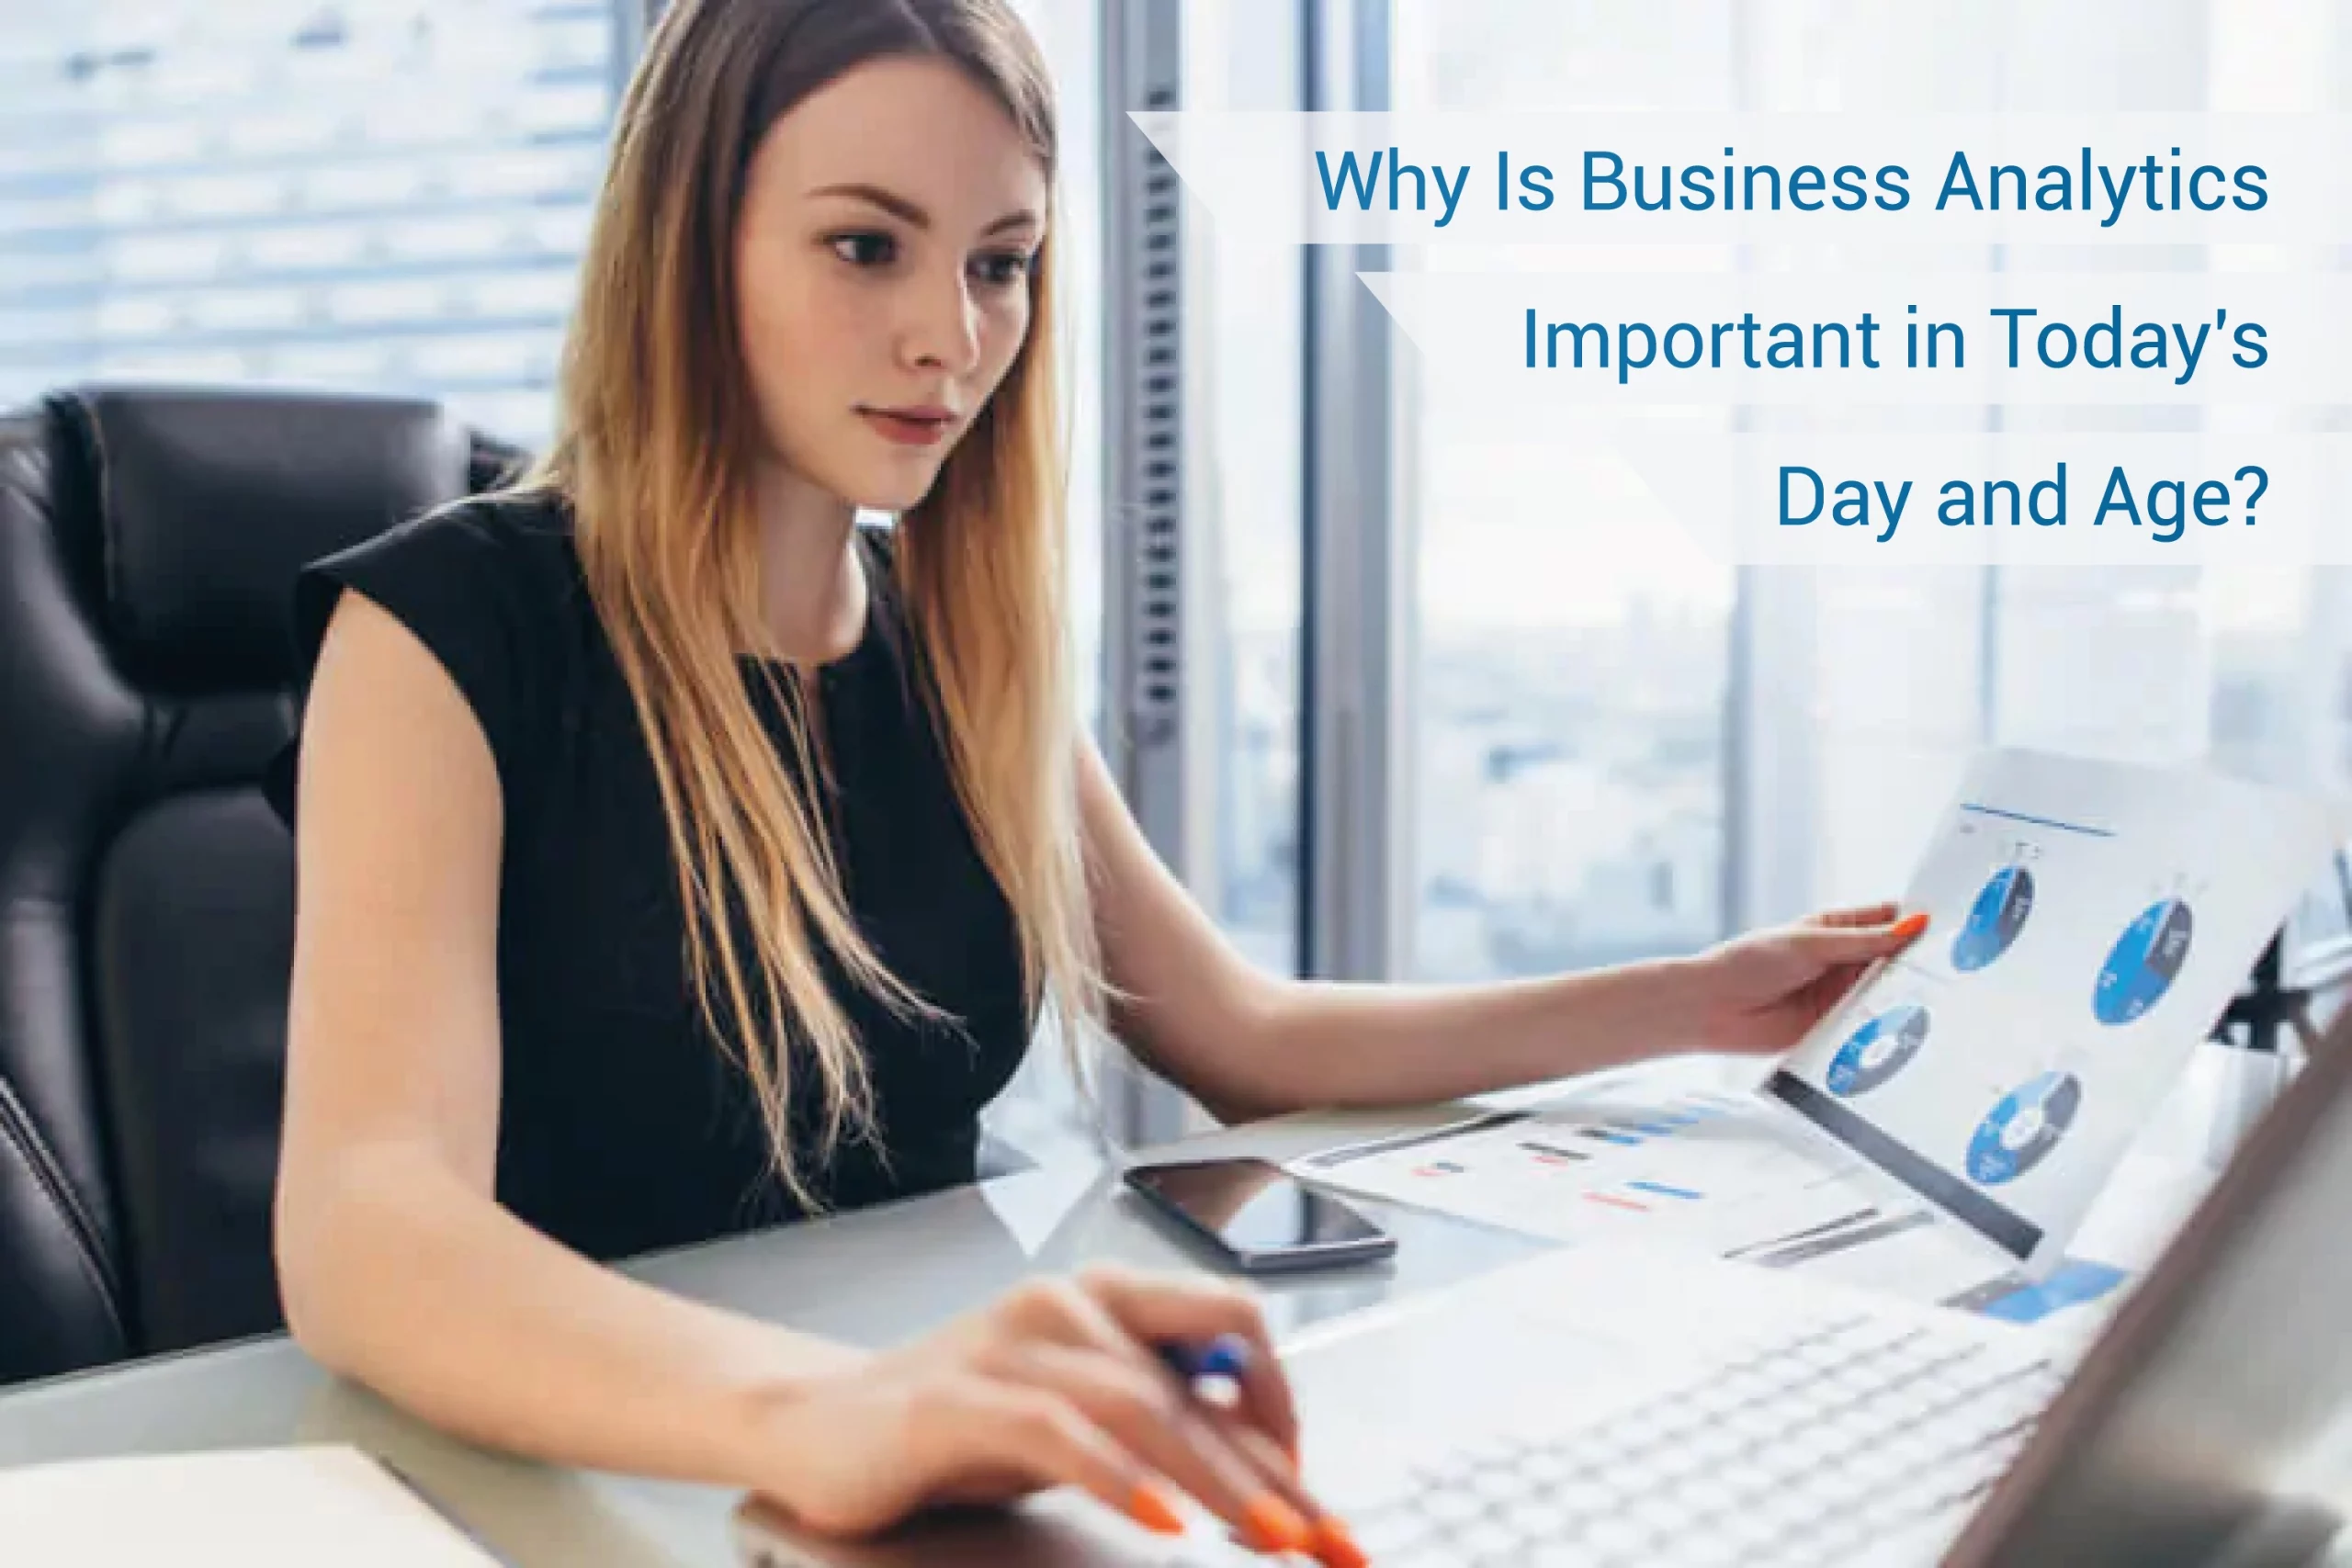 Why Is Business Analytics Important In Today’s Day And Age